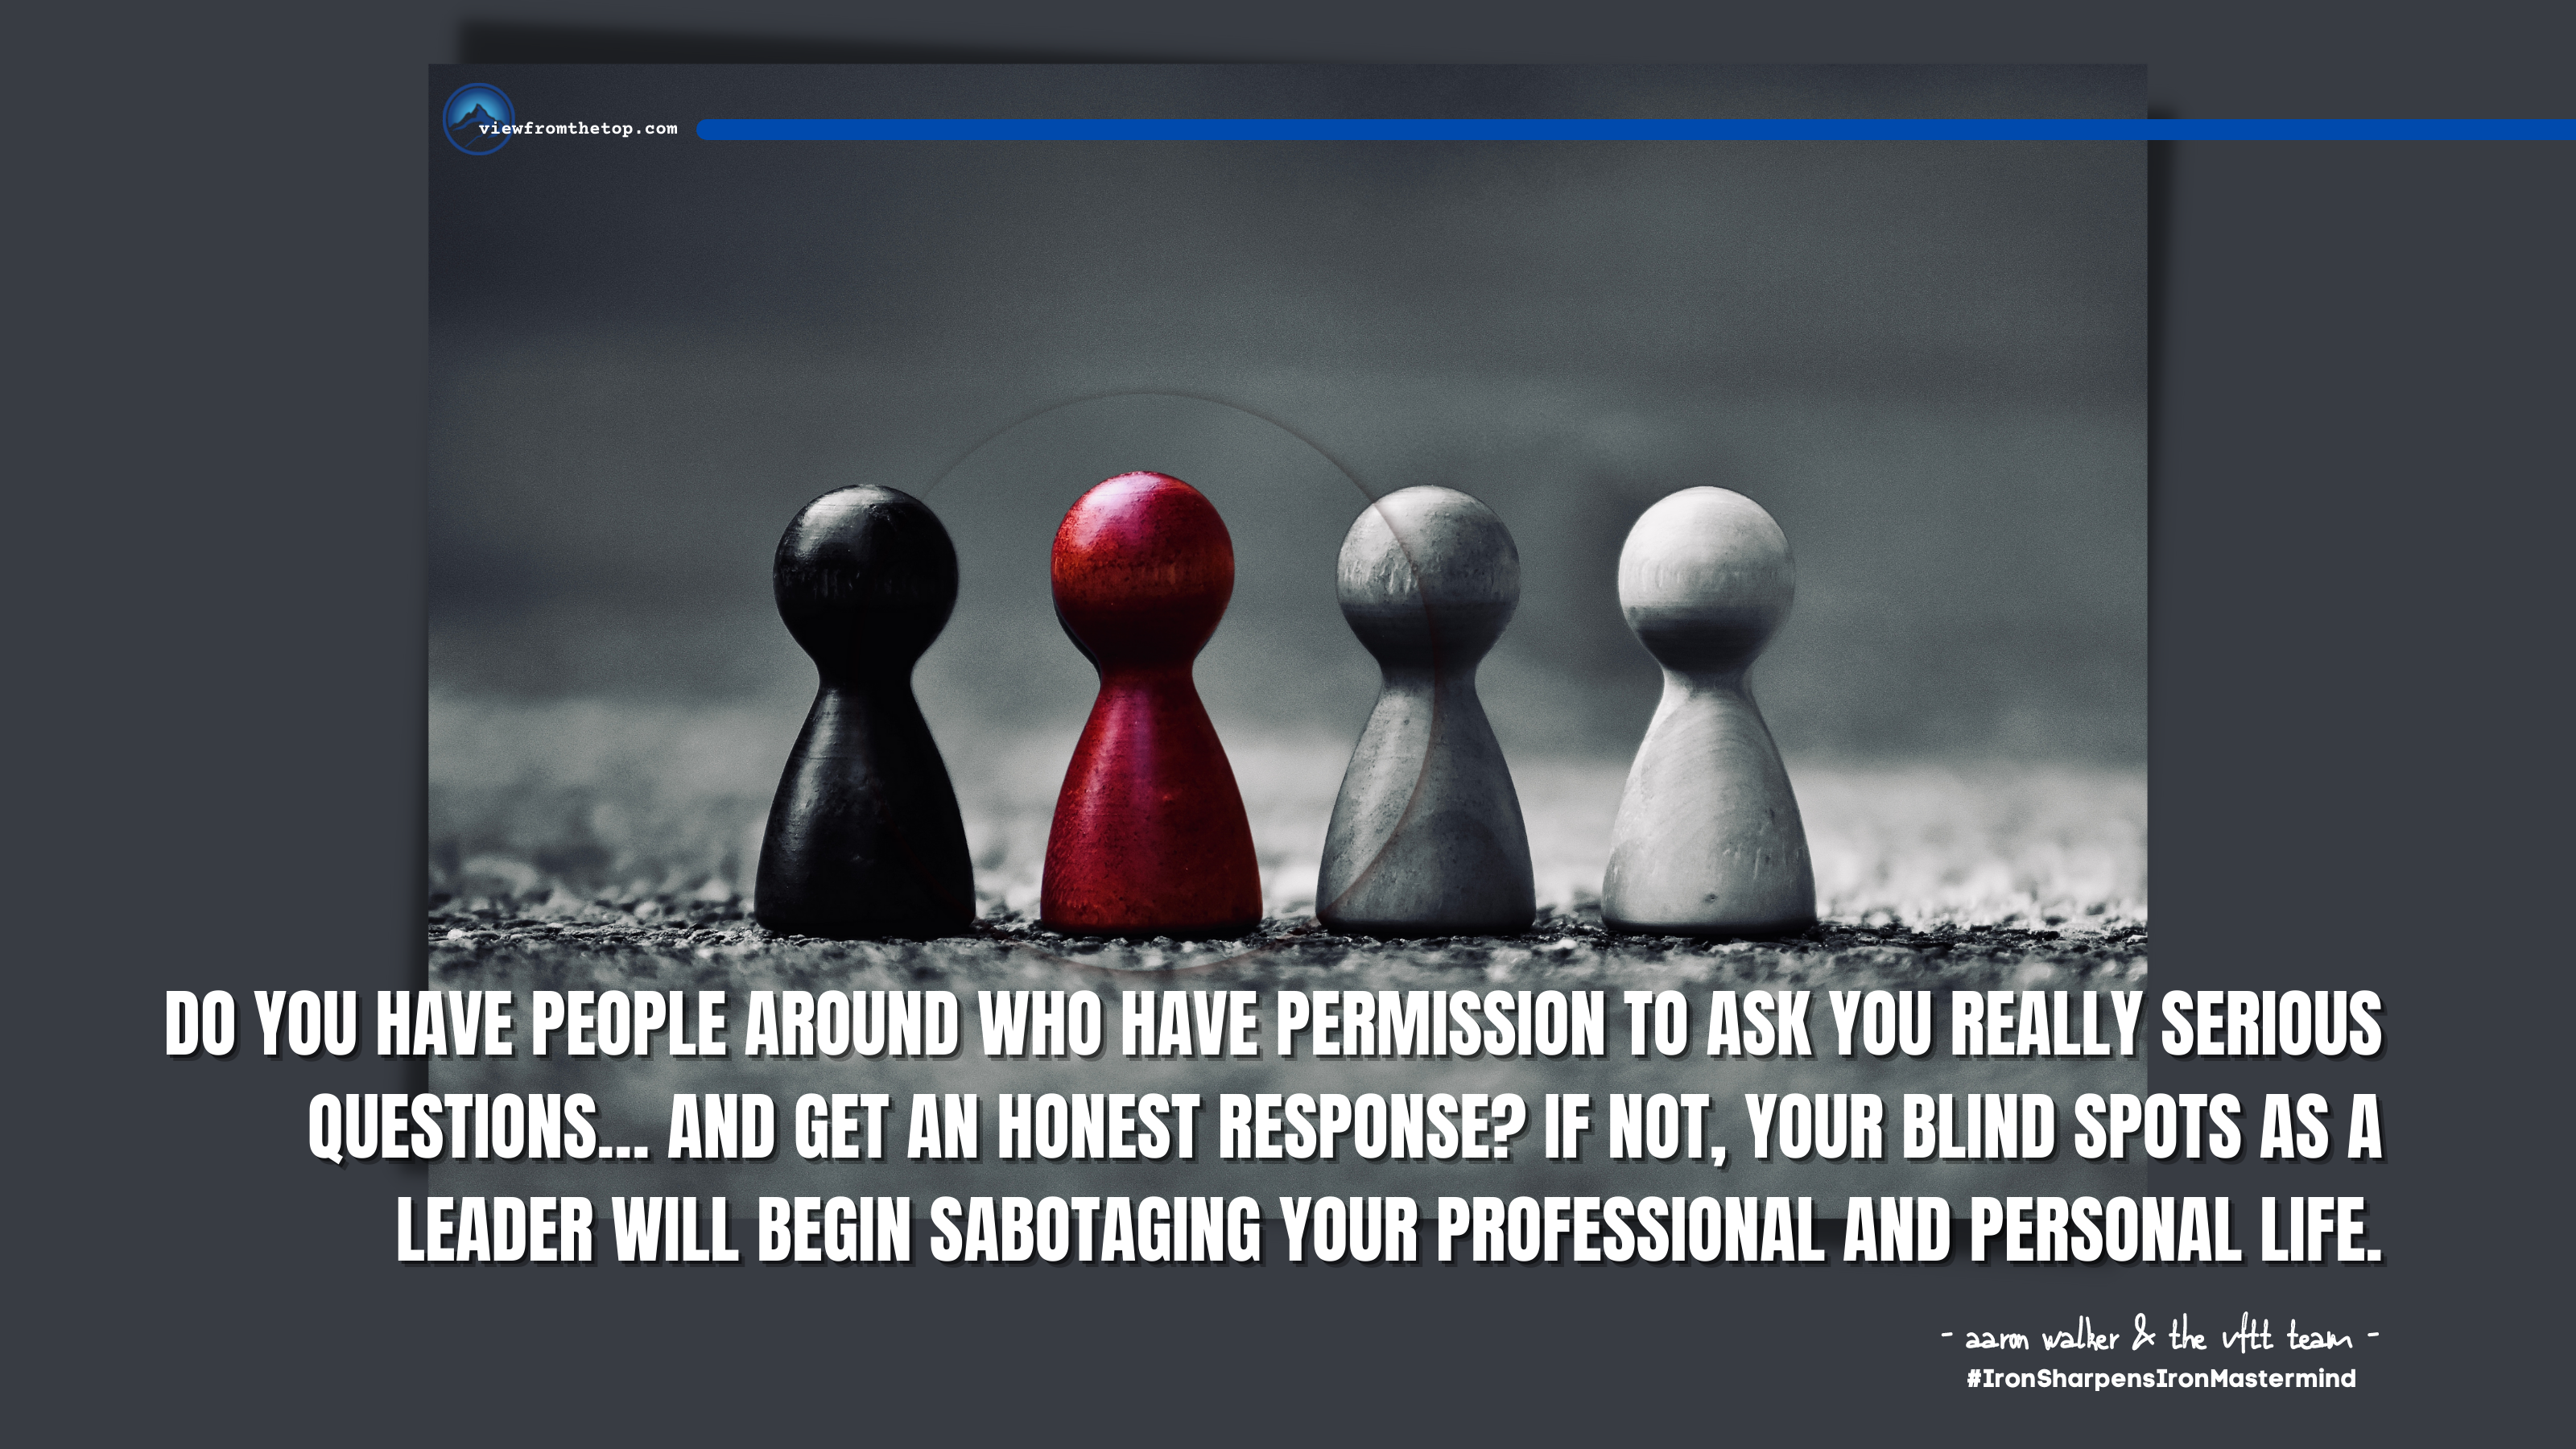 Do you have people around who have permission to ask you really serious questions… and get an honest response If not, your blind spots as a leader will begin sabotaging your professional and personal life. (1)